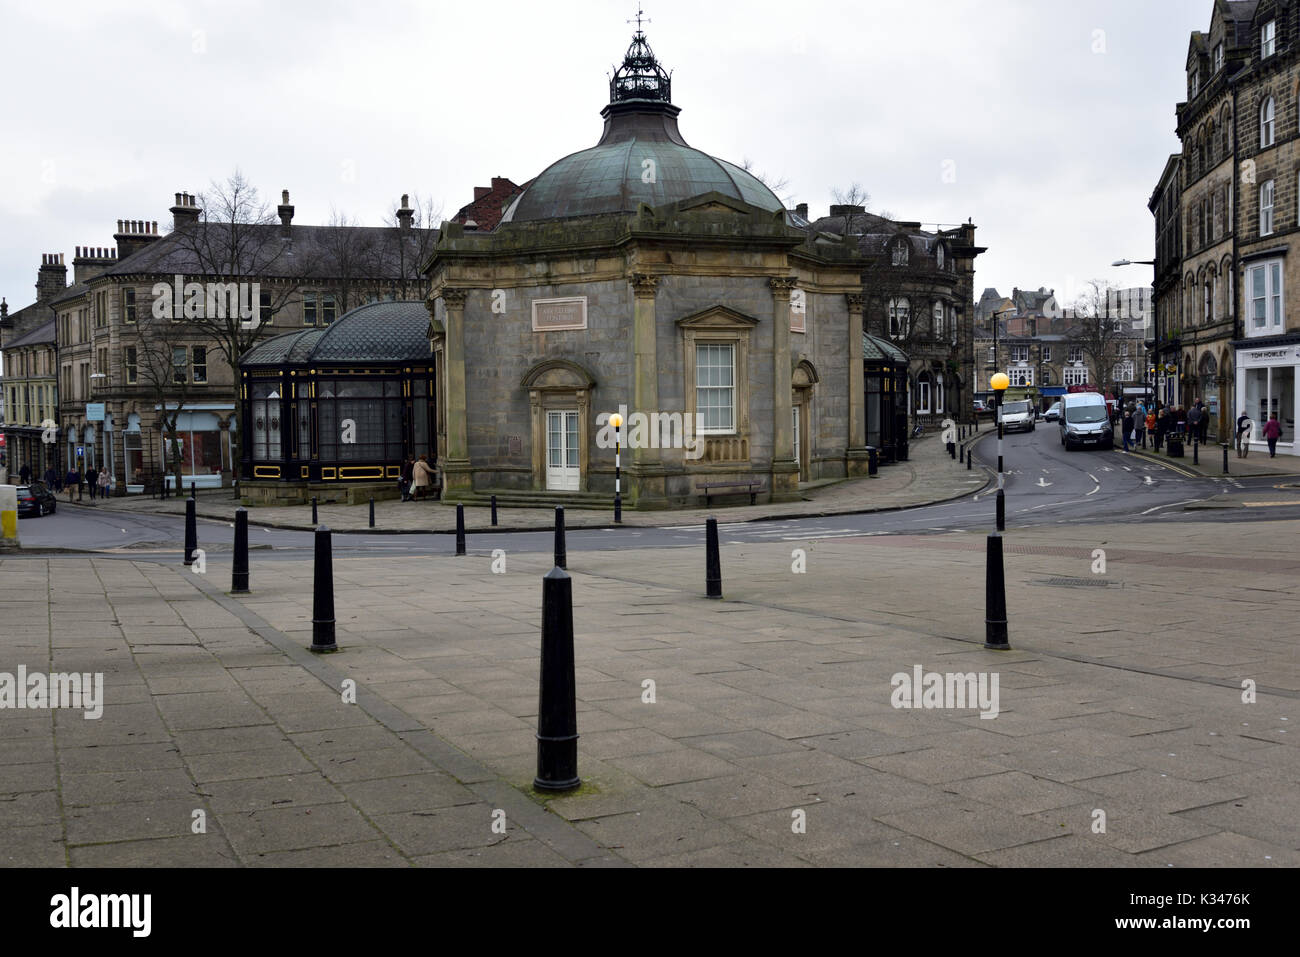 LANDSCAPE Harrogate is a spa town in North Yorkshire, England. Historically in the West Riding of Yorkshire, the town is a tourist destination and its Stock Photo